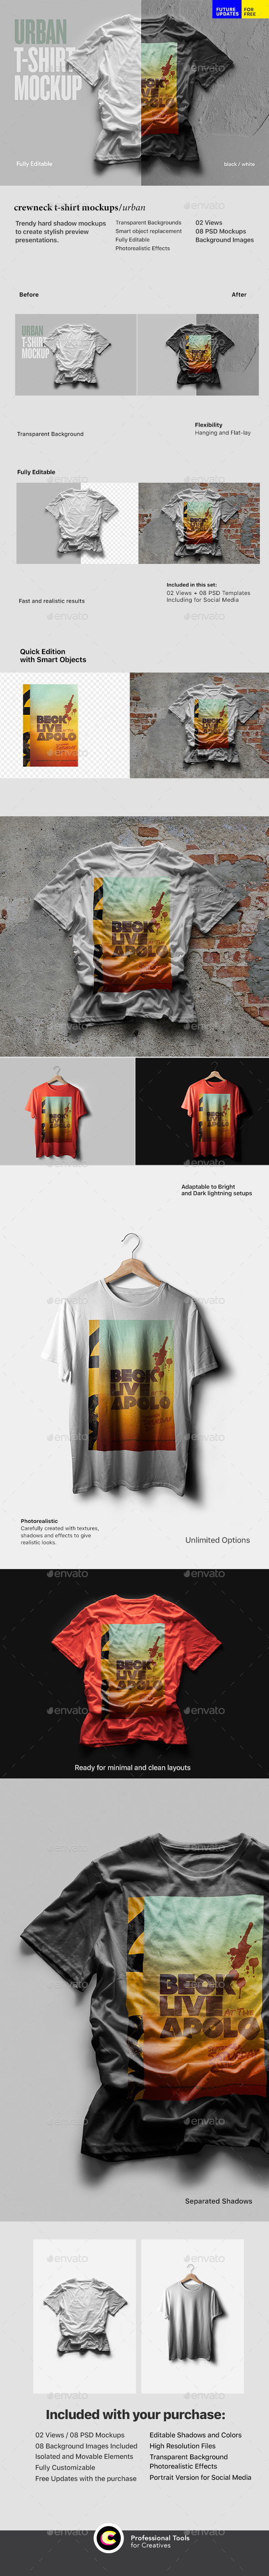 Download Urban T Shirt Mockup By Itscroma Graphicriver